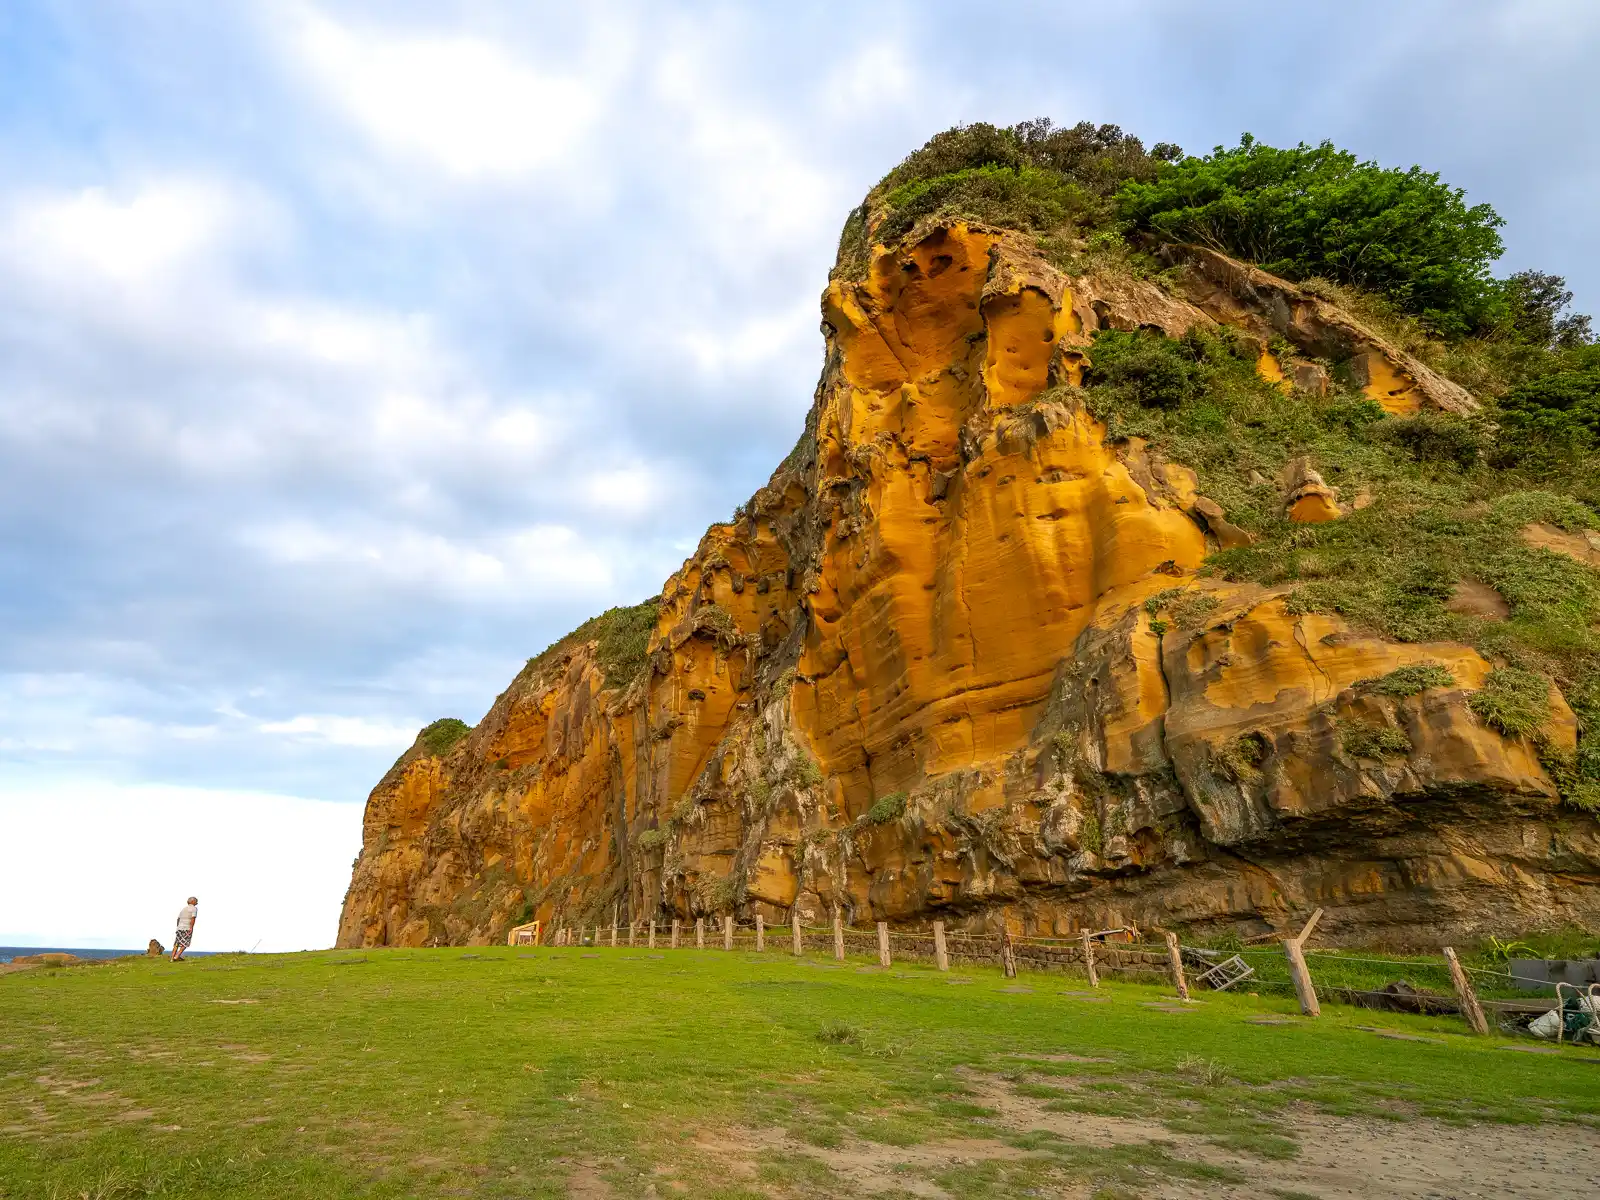 A smooth sandstone cliff rises above the flat grassy area of Fanziao Park.